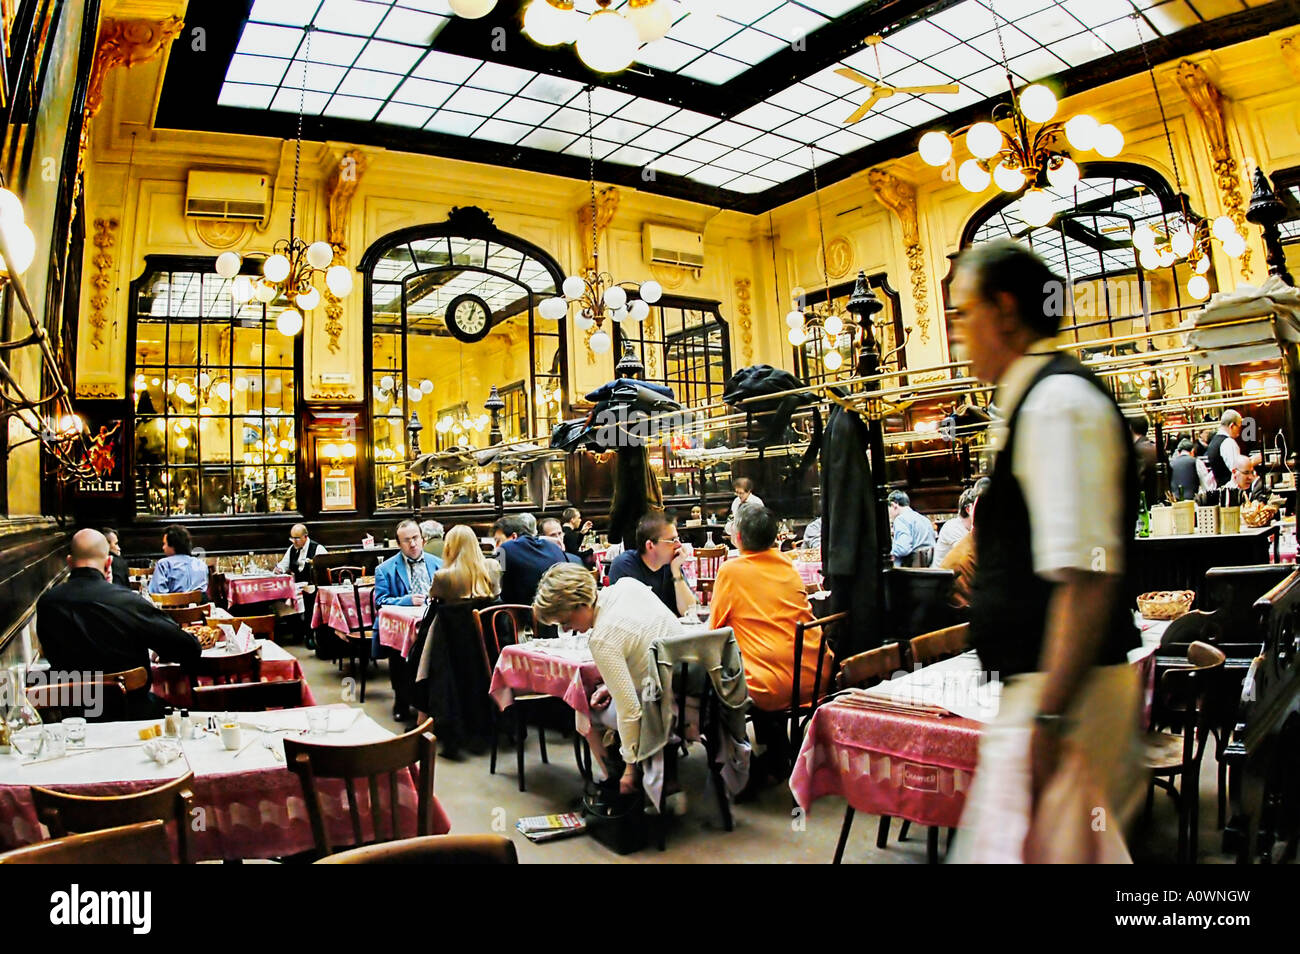 PARIS France, people Sharing Meals in 'Chartier'  French Brasserie Restaurant, Inside with Waiter Serving Customers Interior, european restaurant, Stock Photo